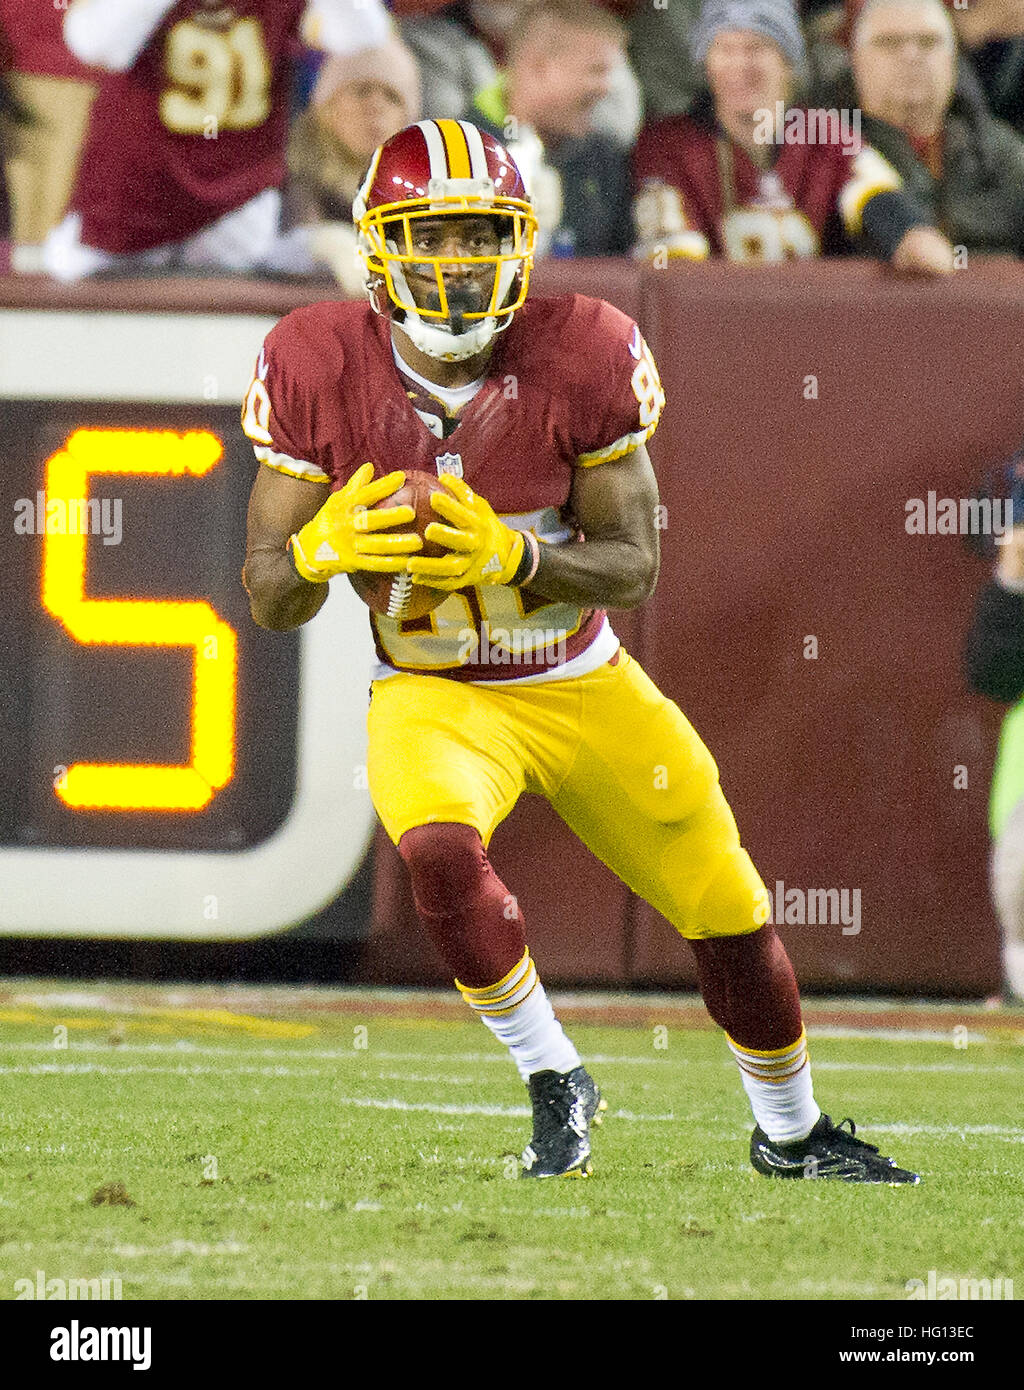 Washington Redskins wide receiver Jamison Crowder (80) returns a punt late in the second quarter against the New York Giants at FedEx Field in Landover, Maryland on Sunday, January 1, 2017. The Giants won the game 19 - 10. Credit: Ron Sachs/CNP (RESTRICTION: NO New York or New Jersey Newspapers or newspapers within a 75 mile radius of New York City) Foto: Ron Sachs/Consolidated News Photos/Ron Sachs - CNP Stock Photo